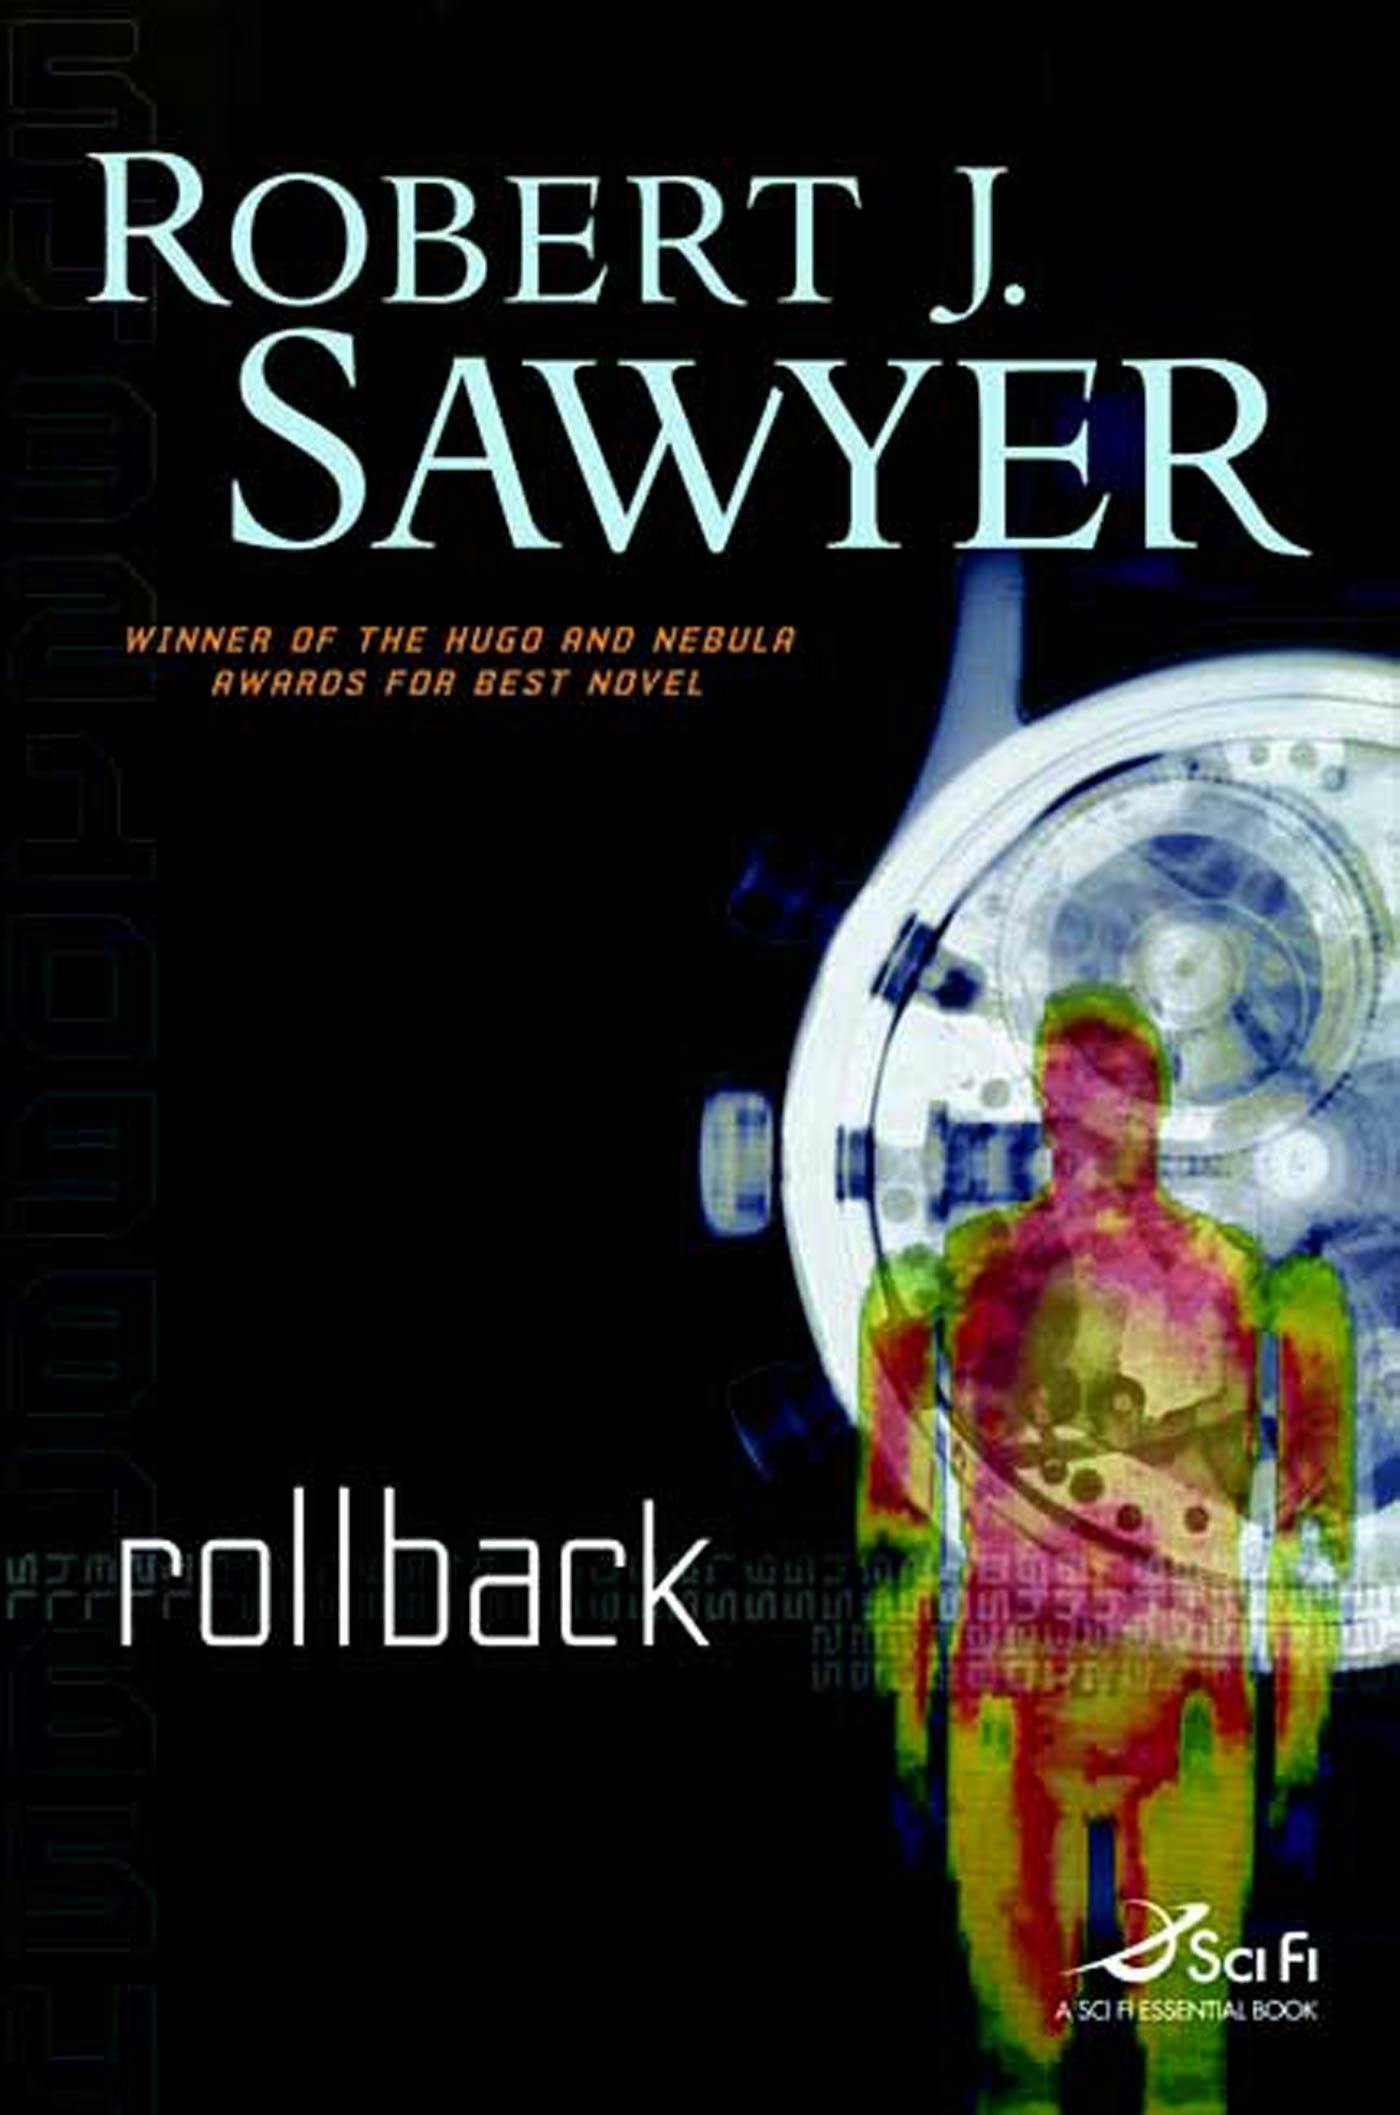 Cover for the book titled as: Rollback